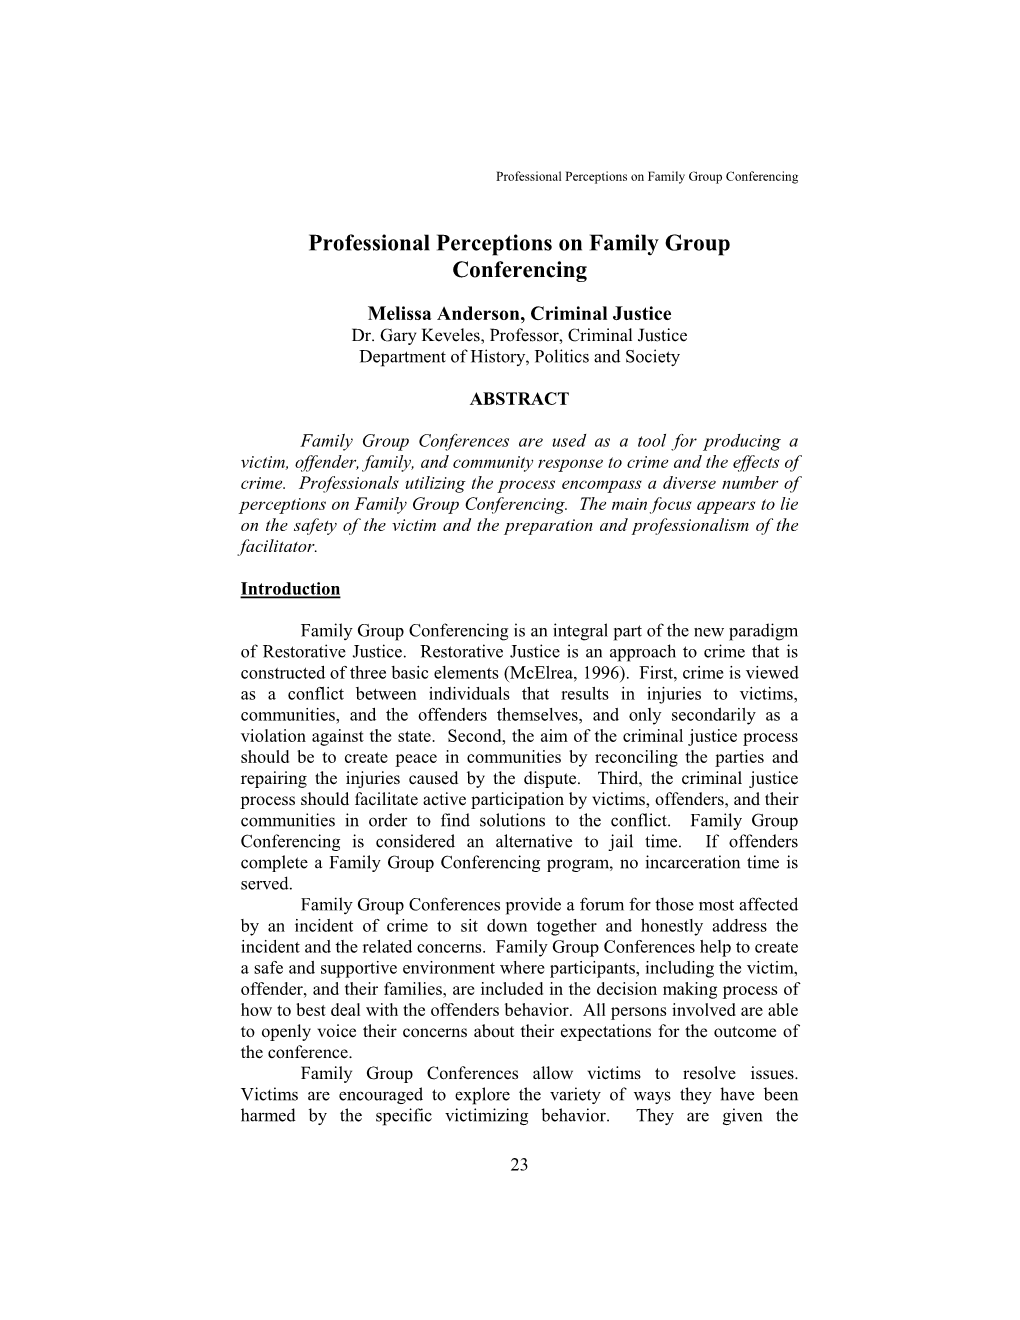 Professional Perceptions on Family Group Conferencing